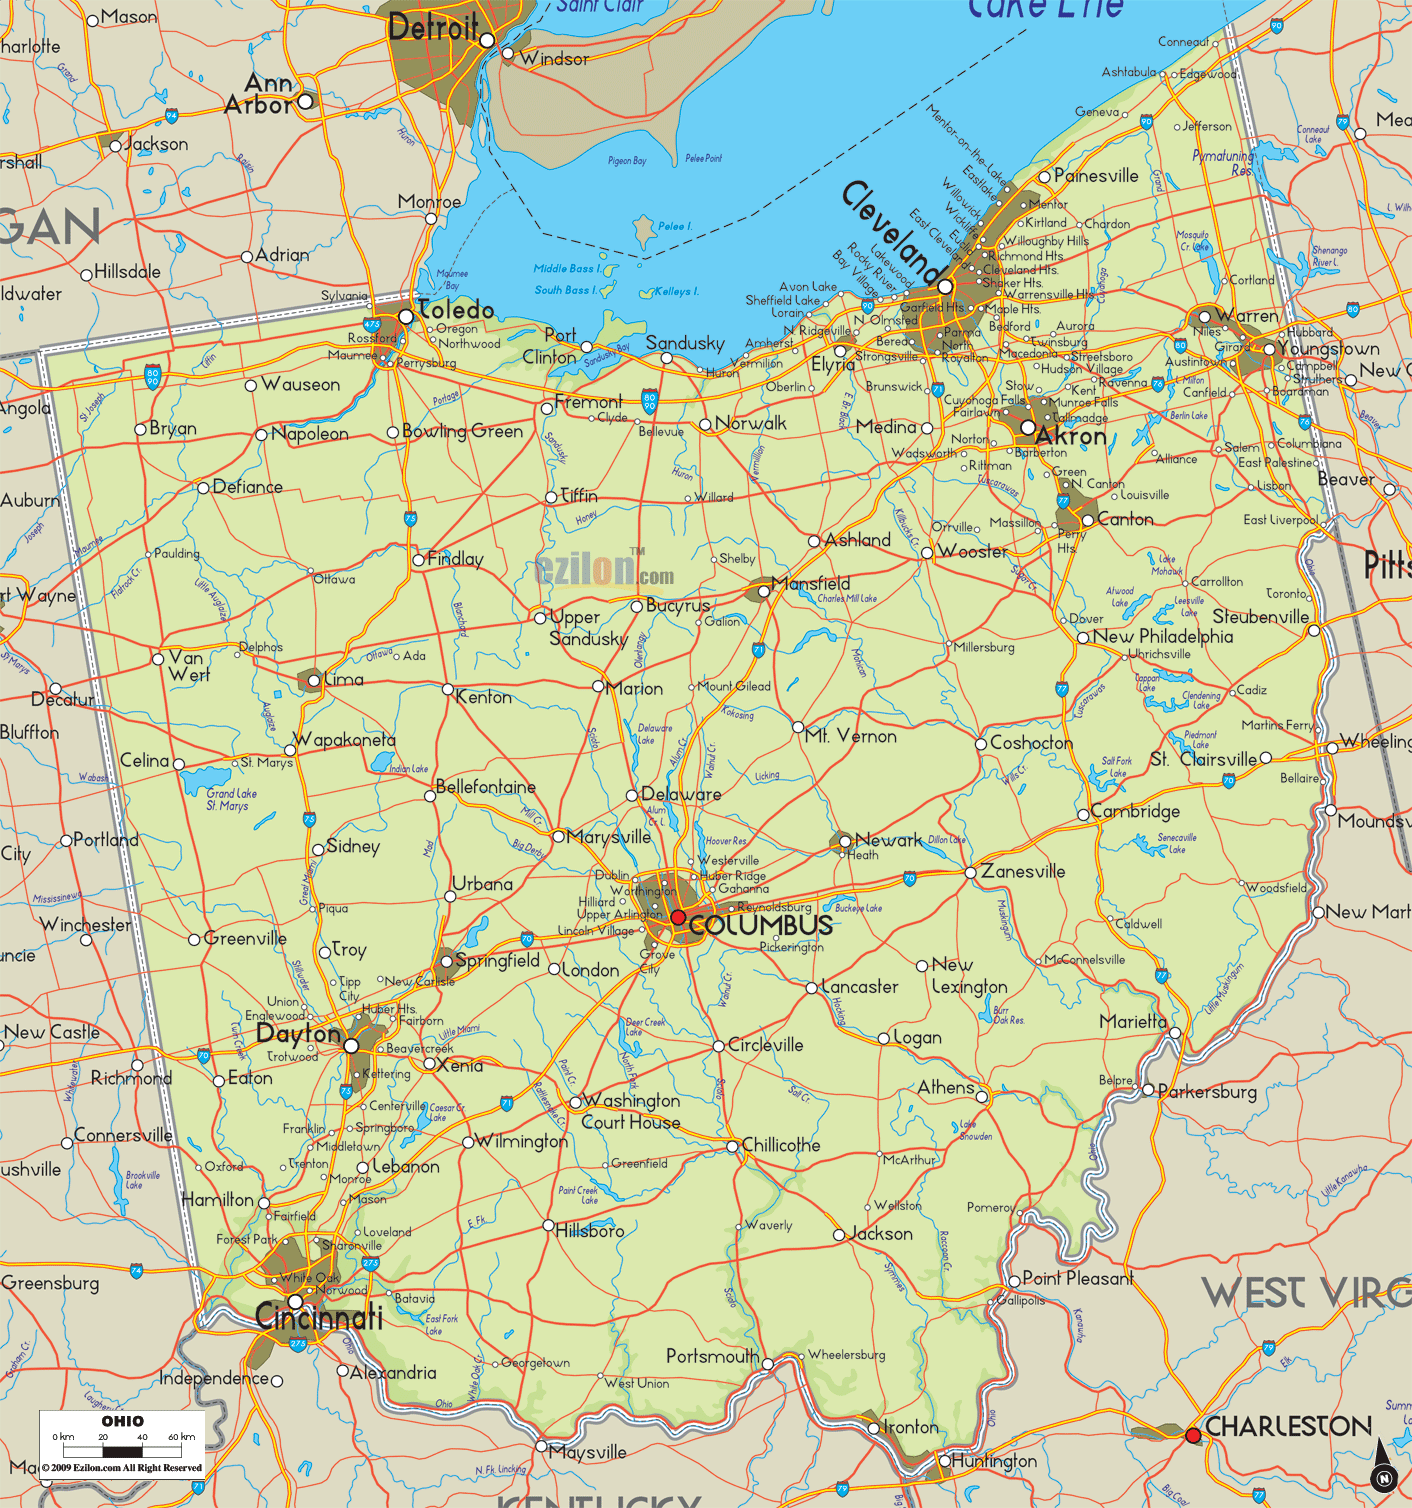 Physical map of Ohio State, USA showing major geographical features such as rivers, lakes, topography and land formations.